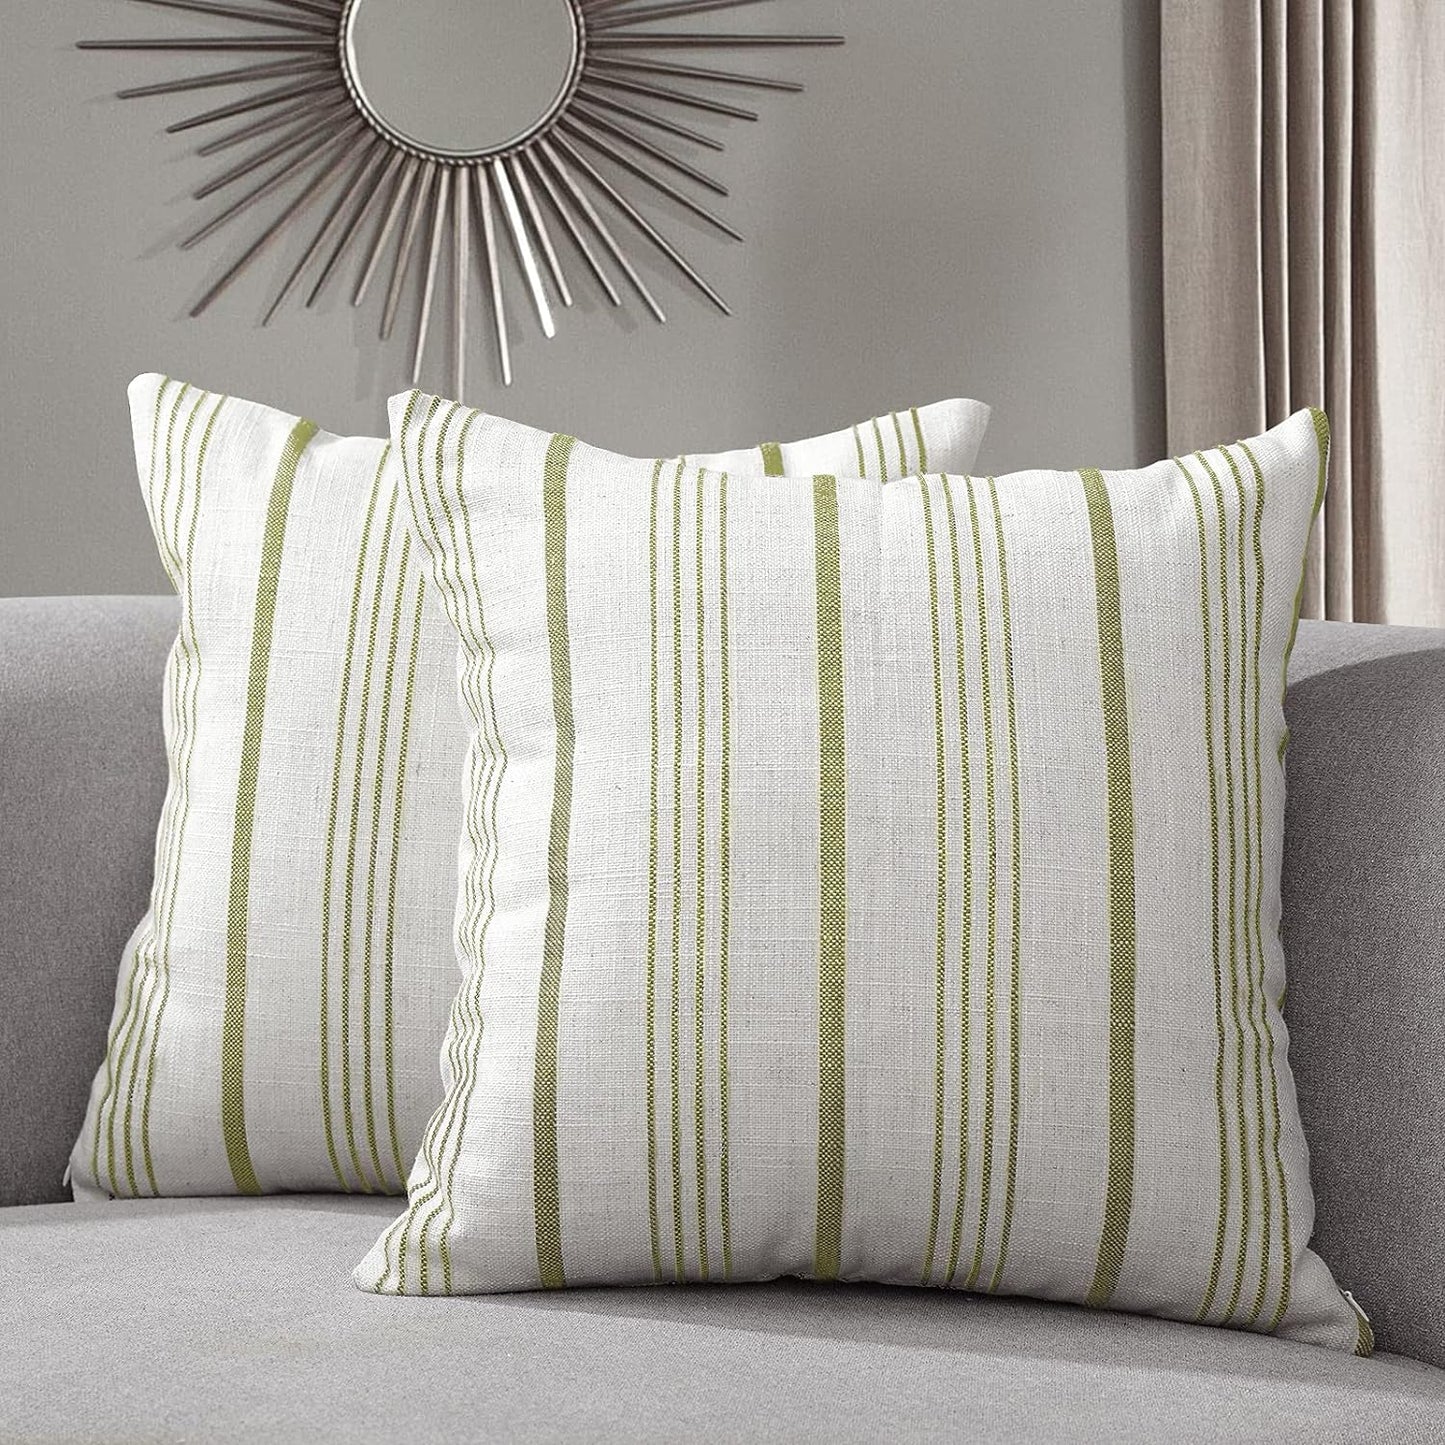 Sunlit Decorative Farmhouse Throw Pillow Case, Cover Only, Set of 2 Cream/Off-White with Charcoal Stripes Square Pillow Cover, 18" x 18", Textured Linen Throw Cushion Covers